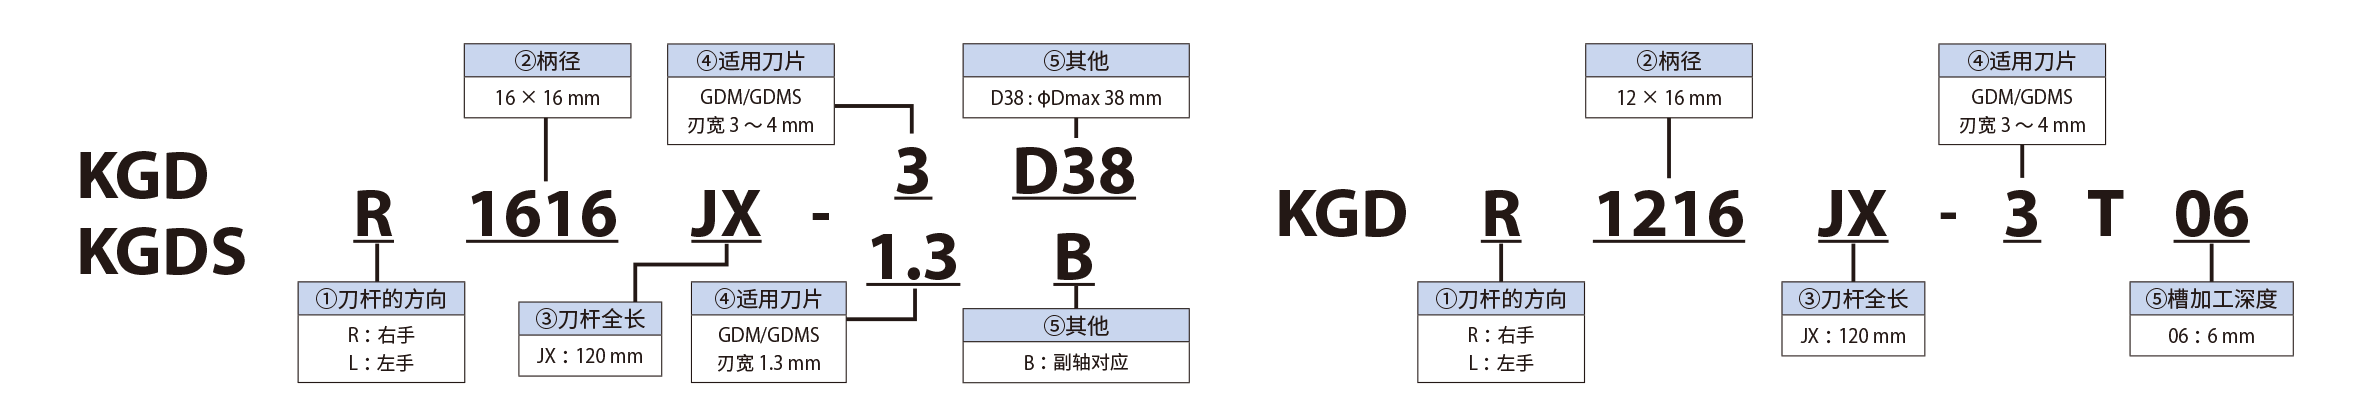 KGD 25